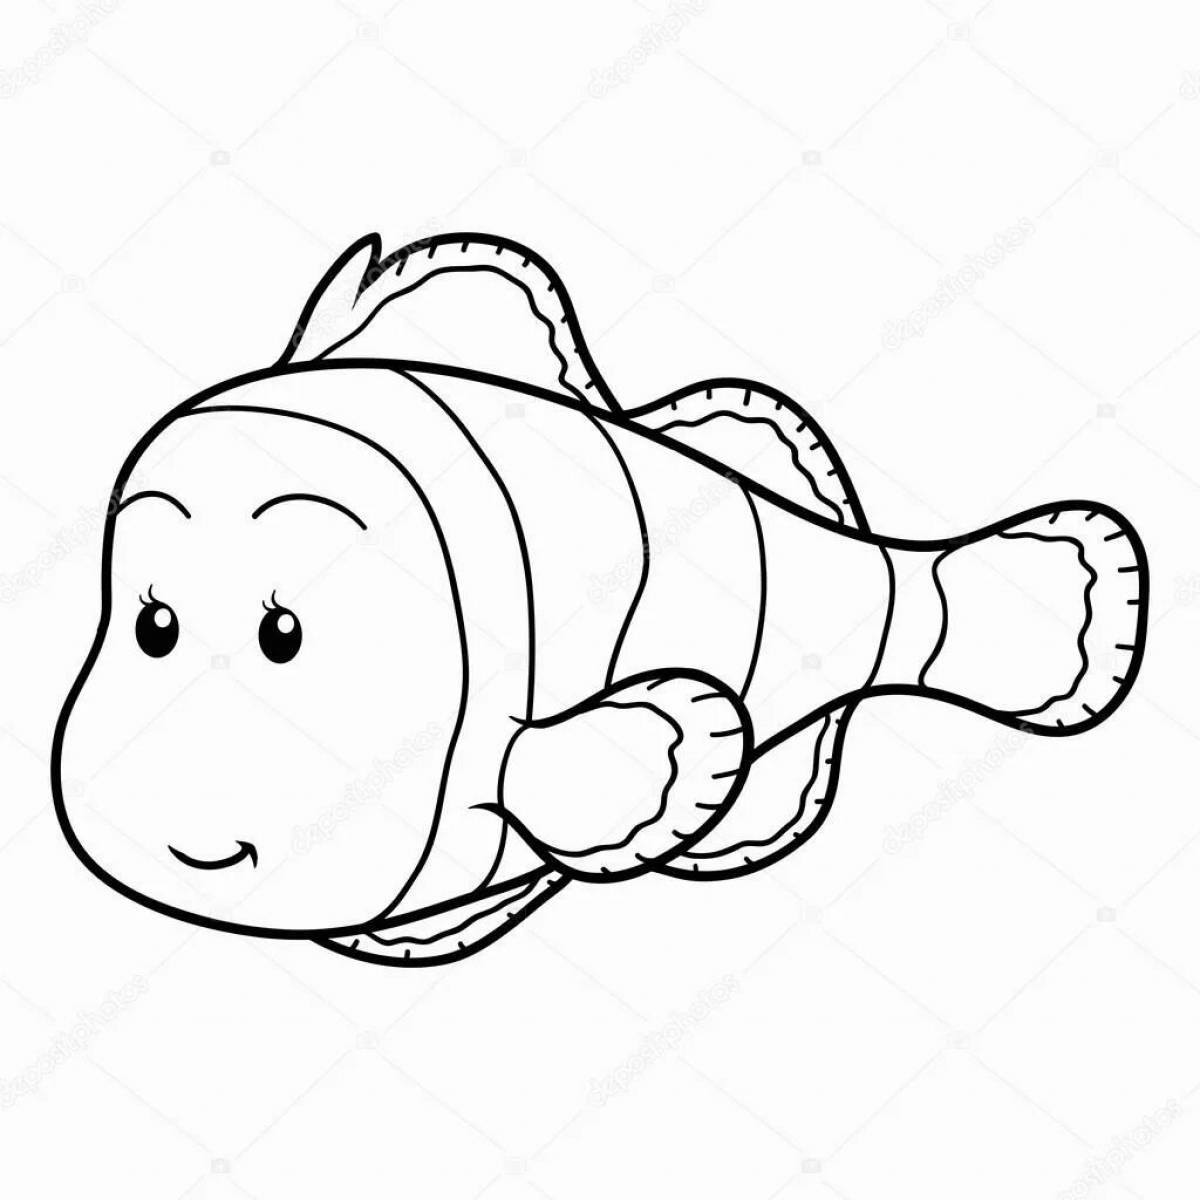 Delicate drawing of a clownfish